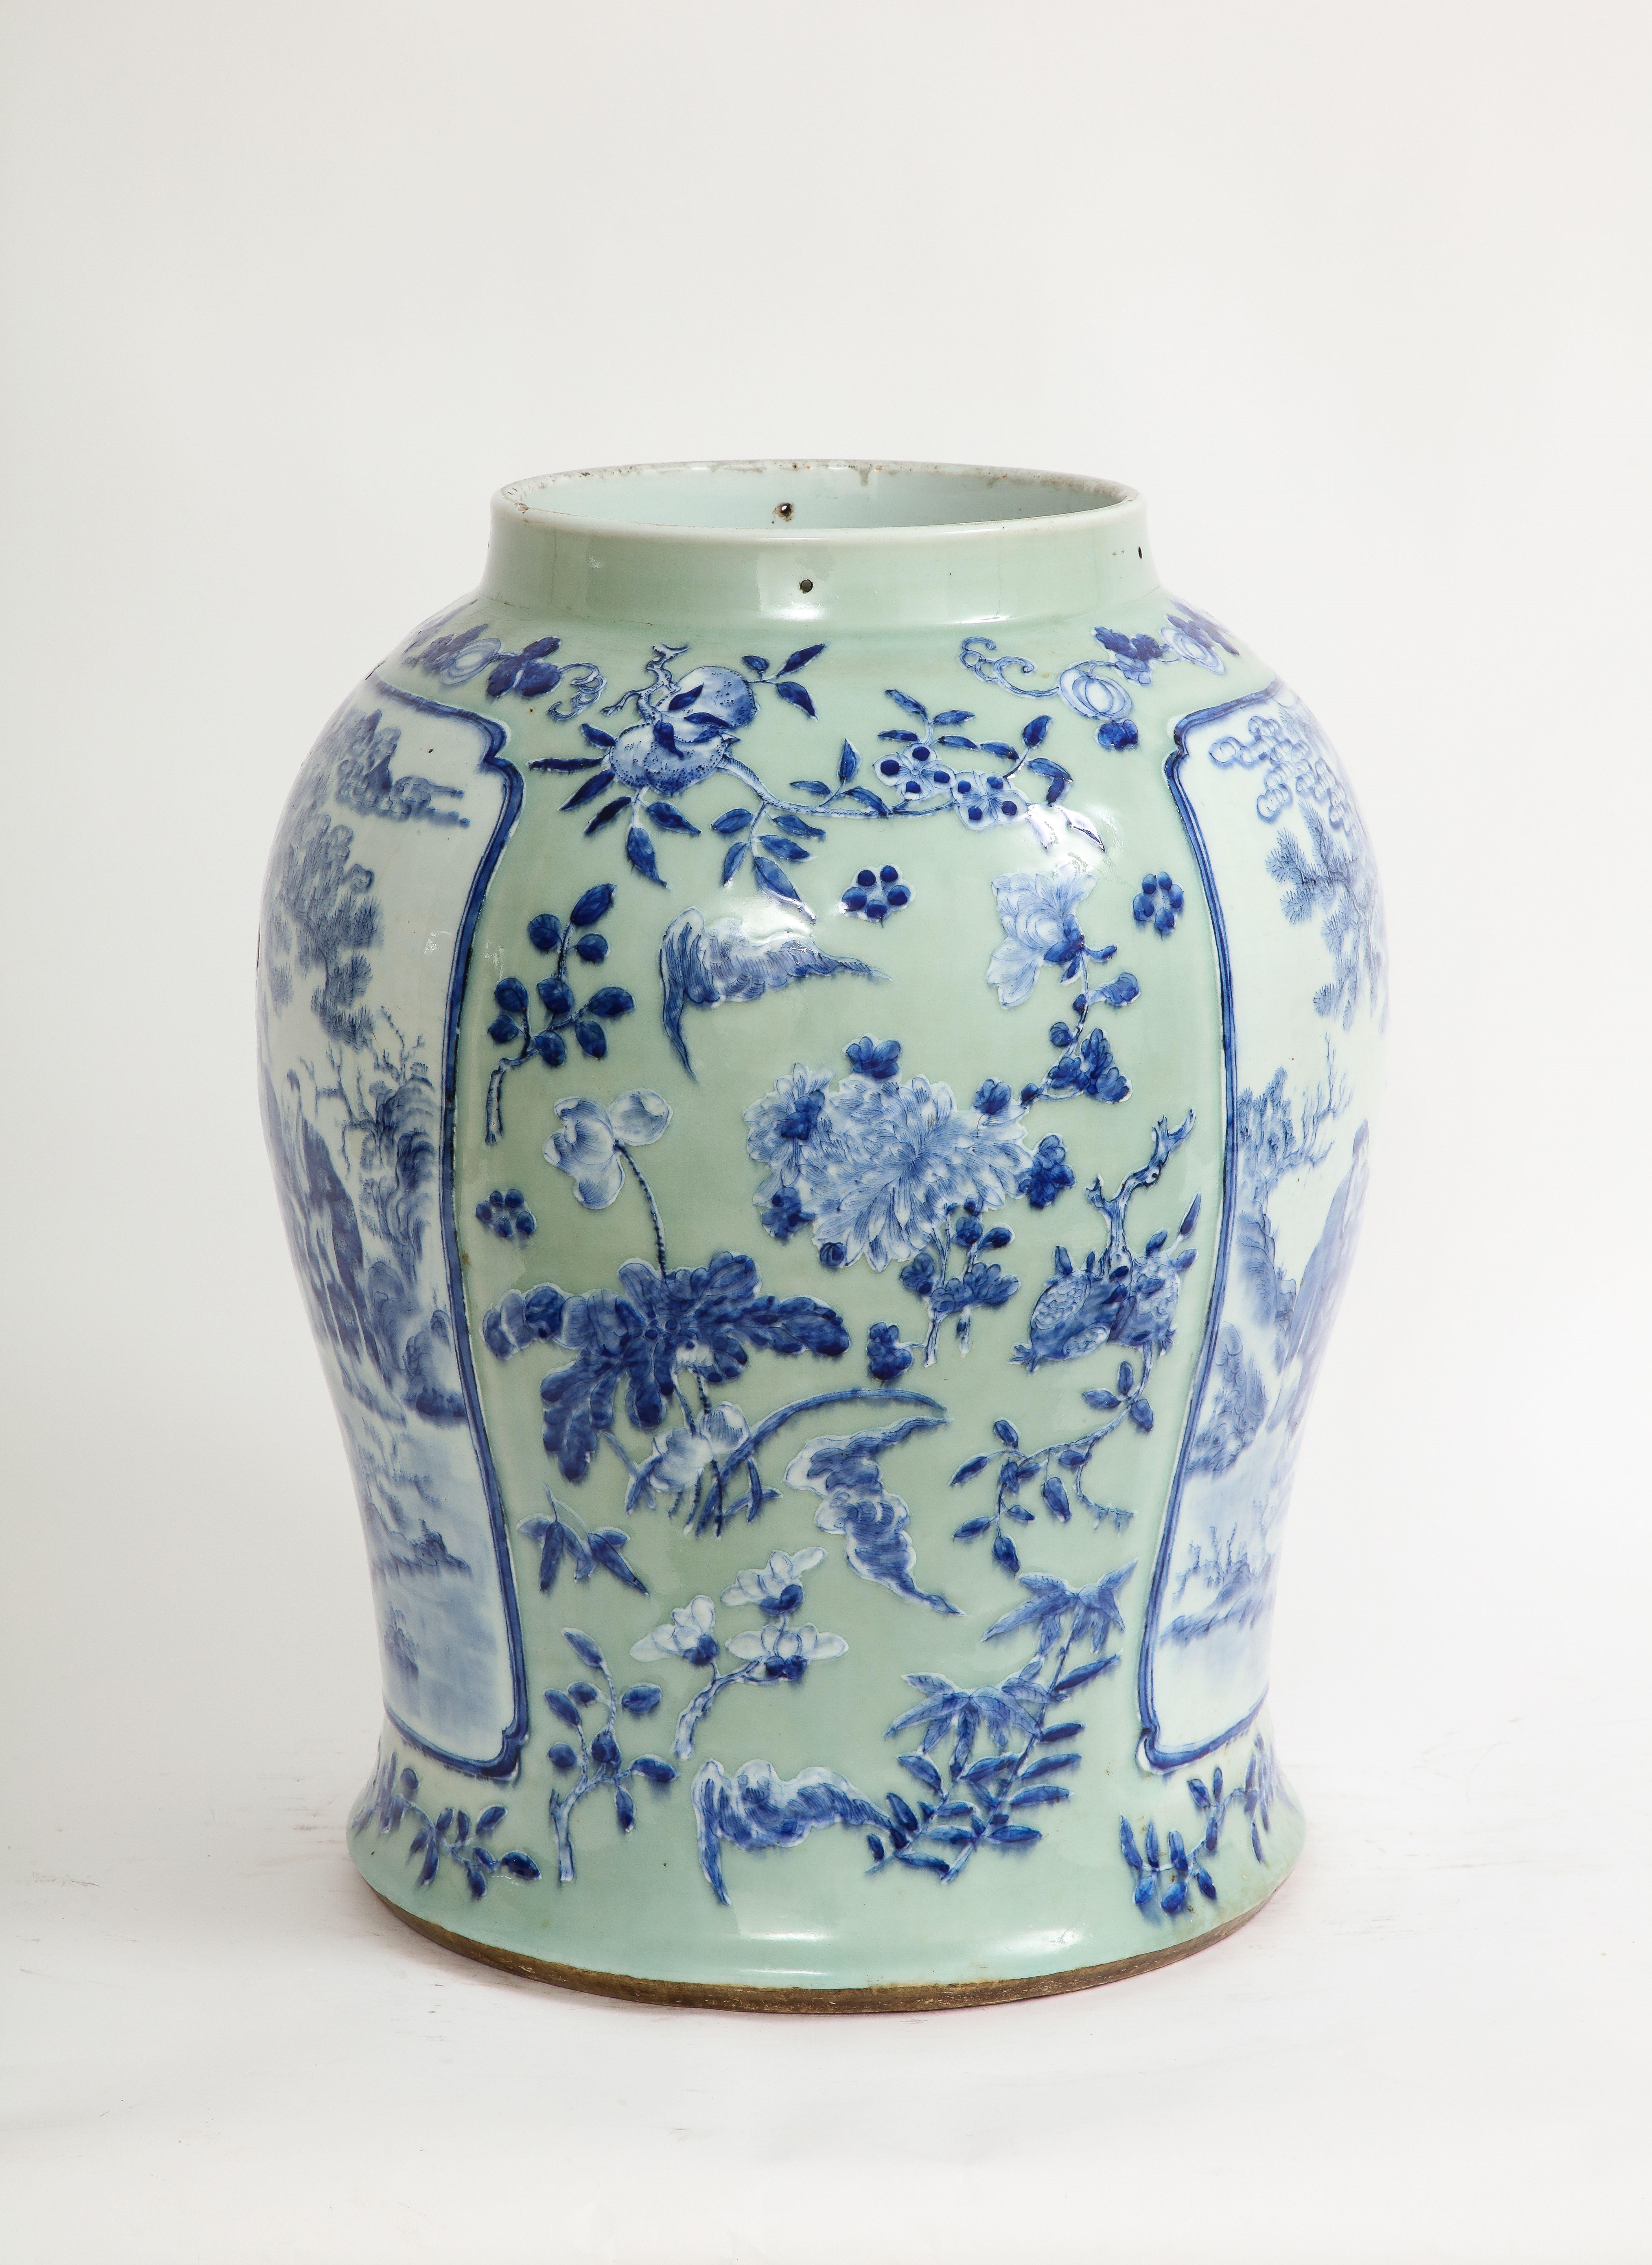 Porcelain 19th C Chinese Celadon Ground Vase: Blue & White Cartouches of Scholars & Elders For Sale